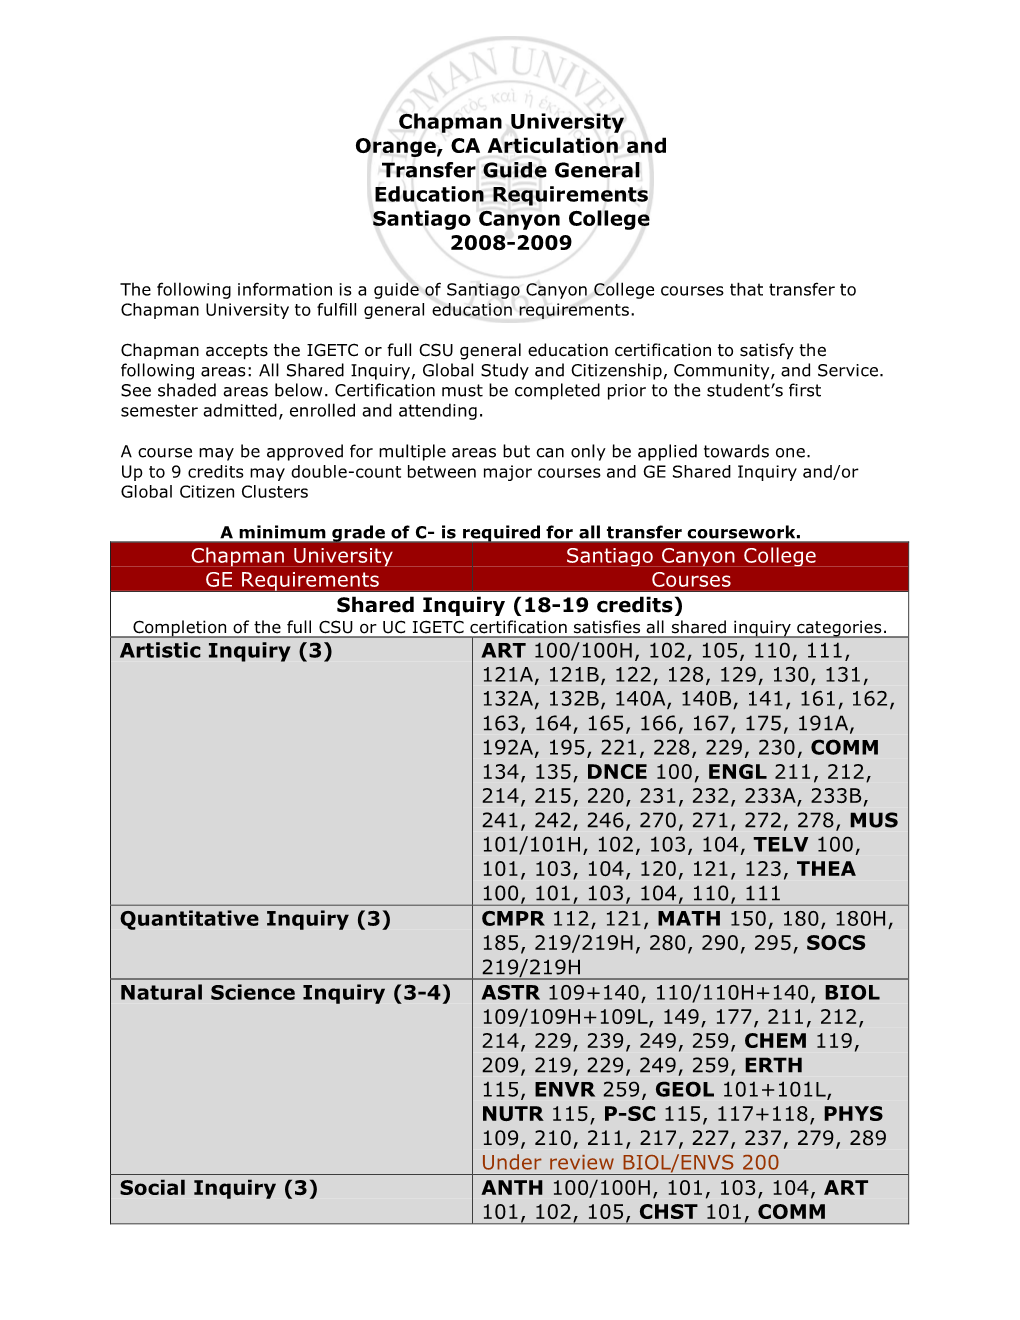 Chapman University Orange, CA Articulation and Transfer Guide General Education Requirements Santiago Canyon College 2008-2009 C